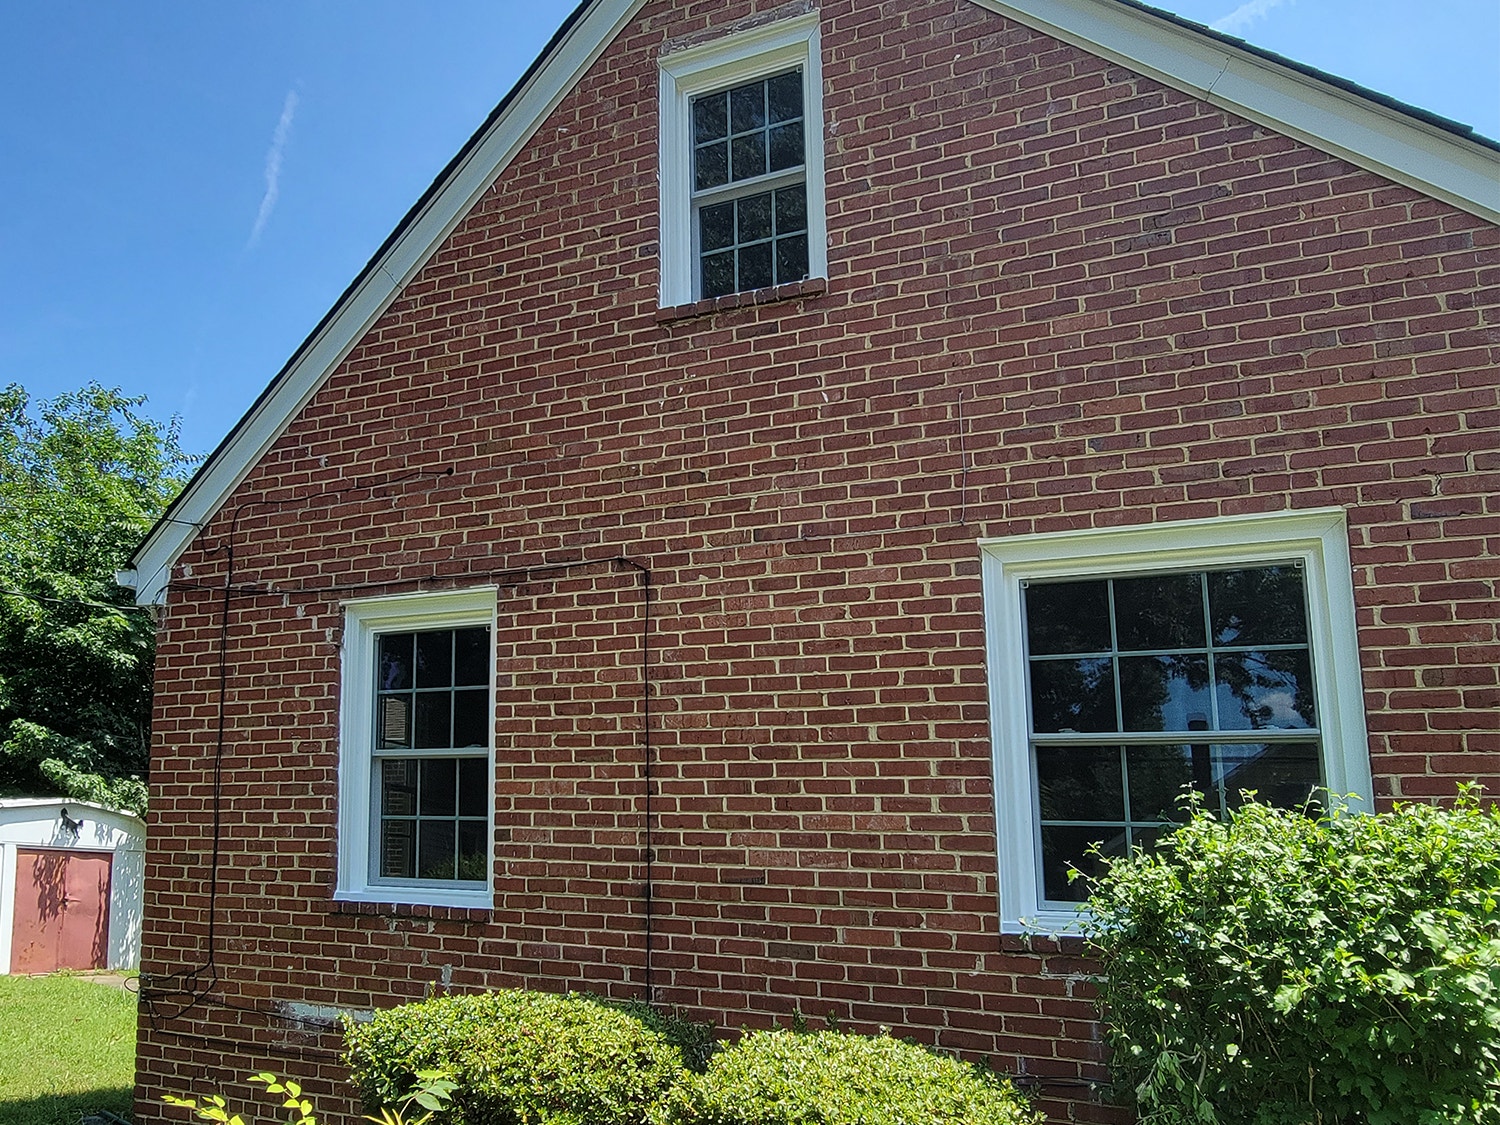 Brick exterior of Richmond home with vinyl double-hung windows